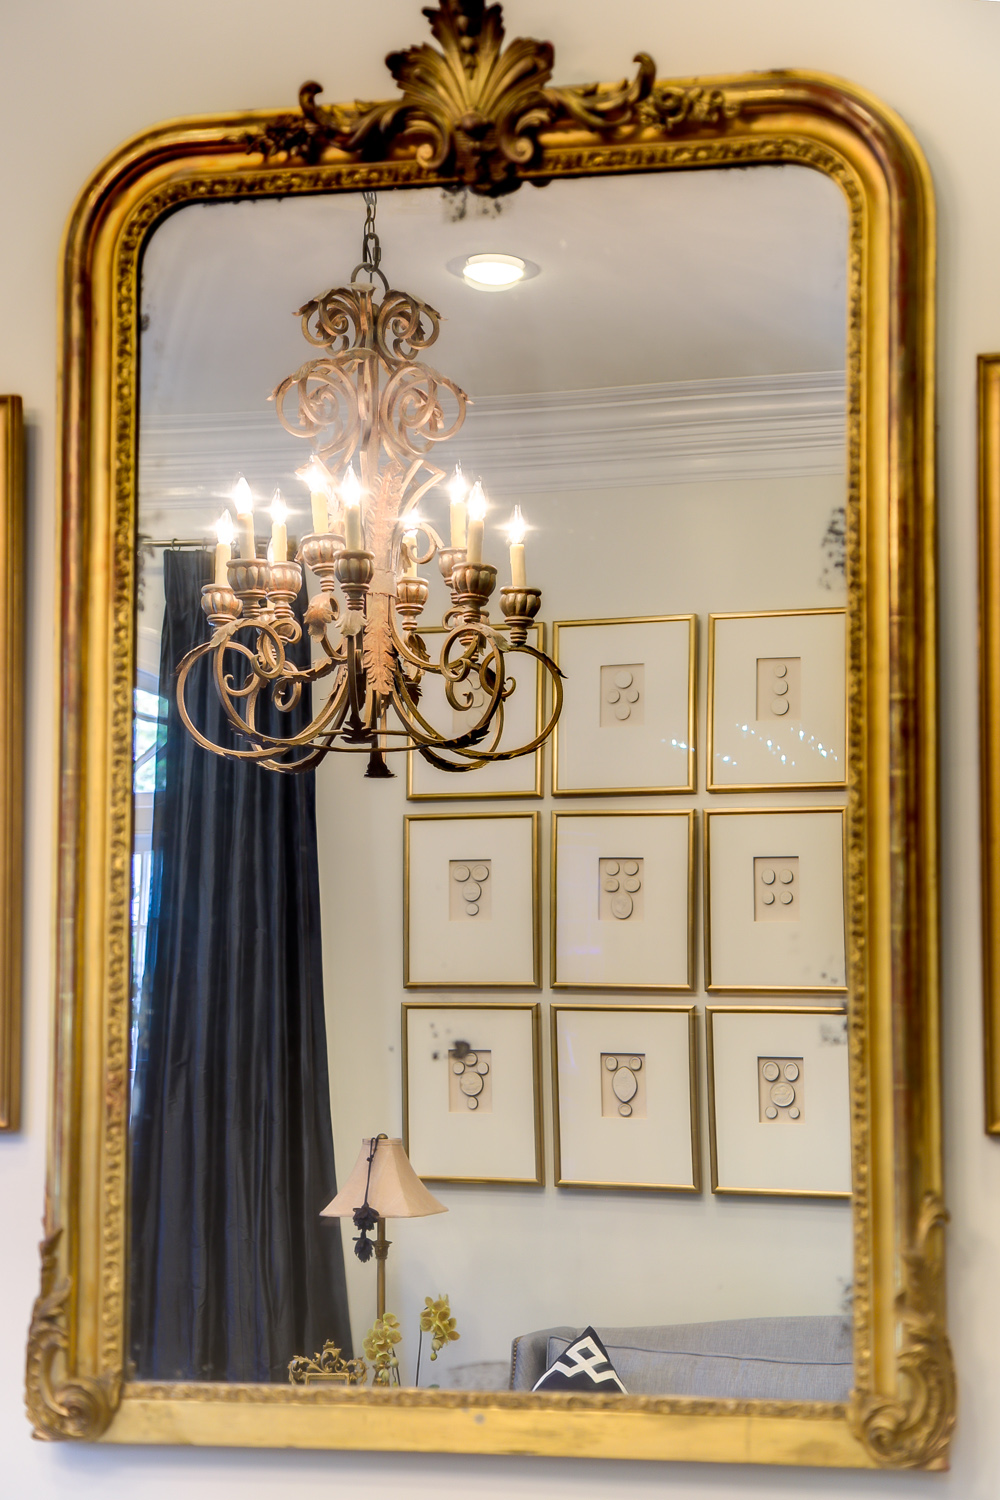 mirrors and art decorating ideas metairie residential interior design khb interiors